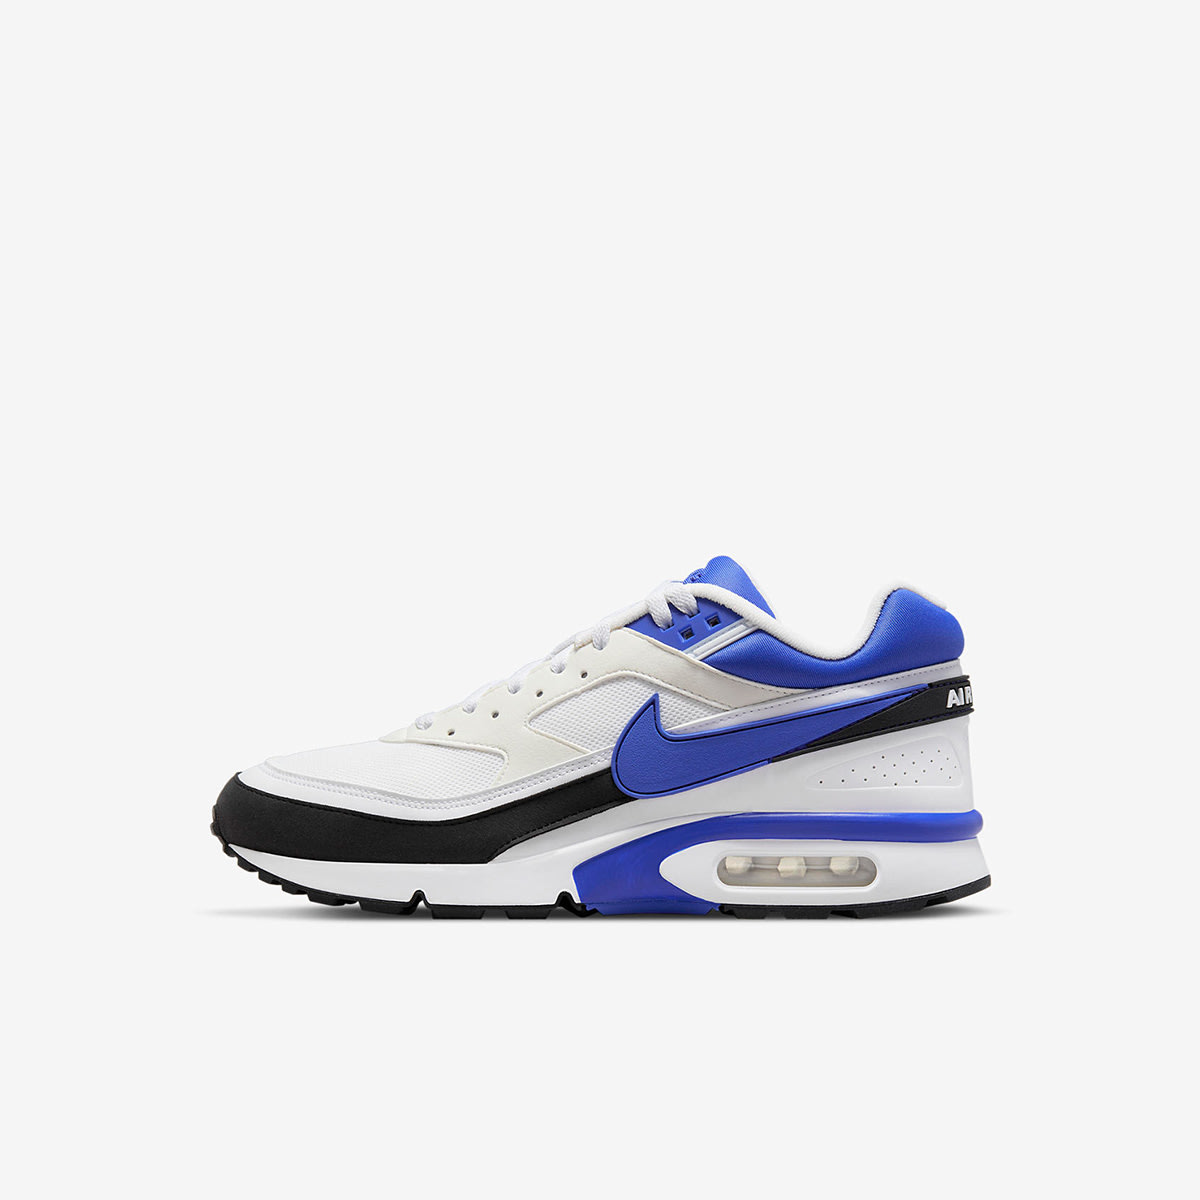 Nike Air Max BW OG (White, Persian Violet & Black) | END. Launches